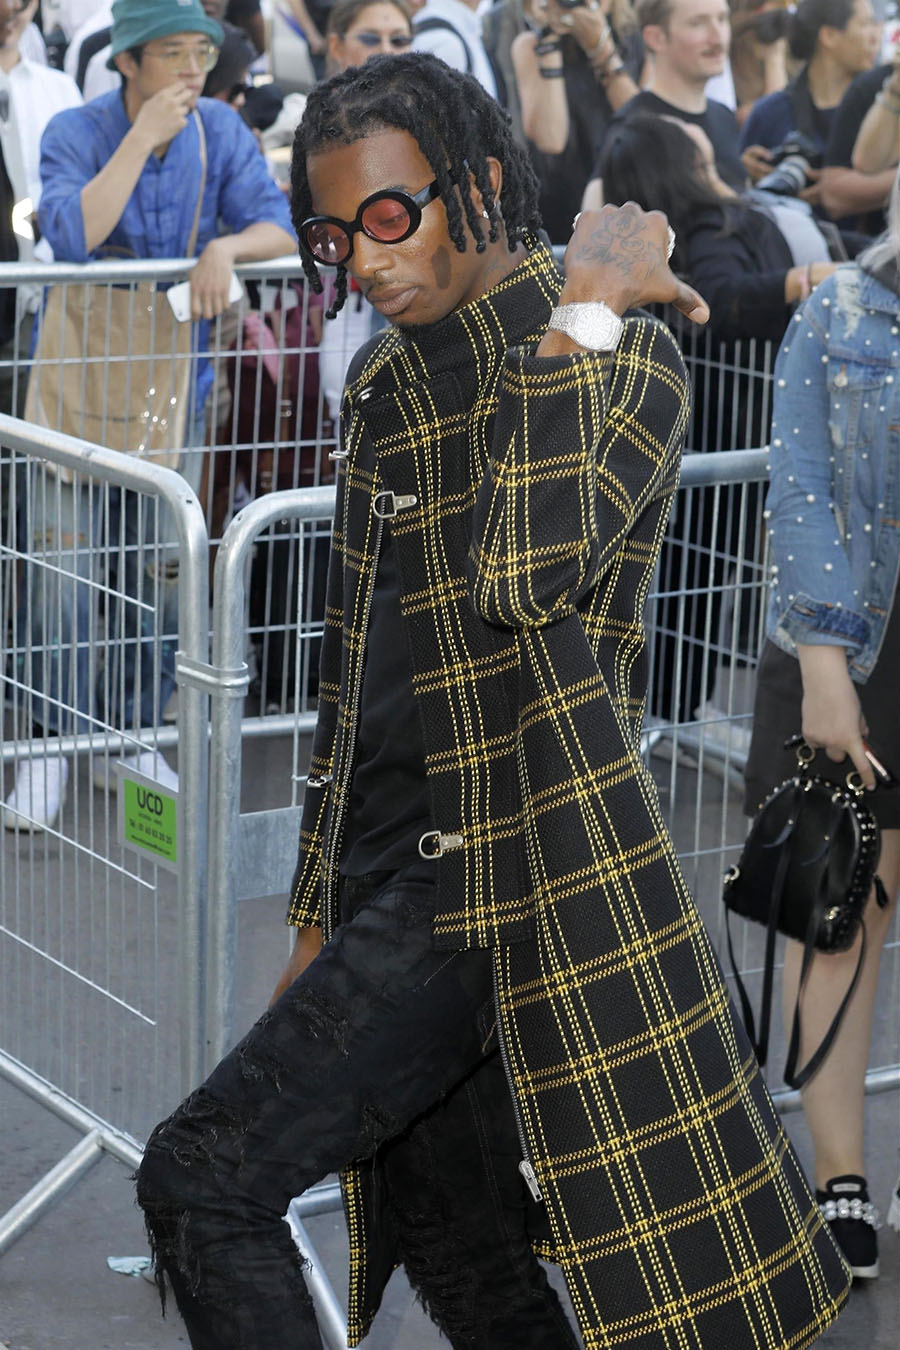 Rapper Playboi Carti arrive at the Off-White Menswear runway show in by Best Image / | Sandra Rose